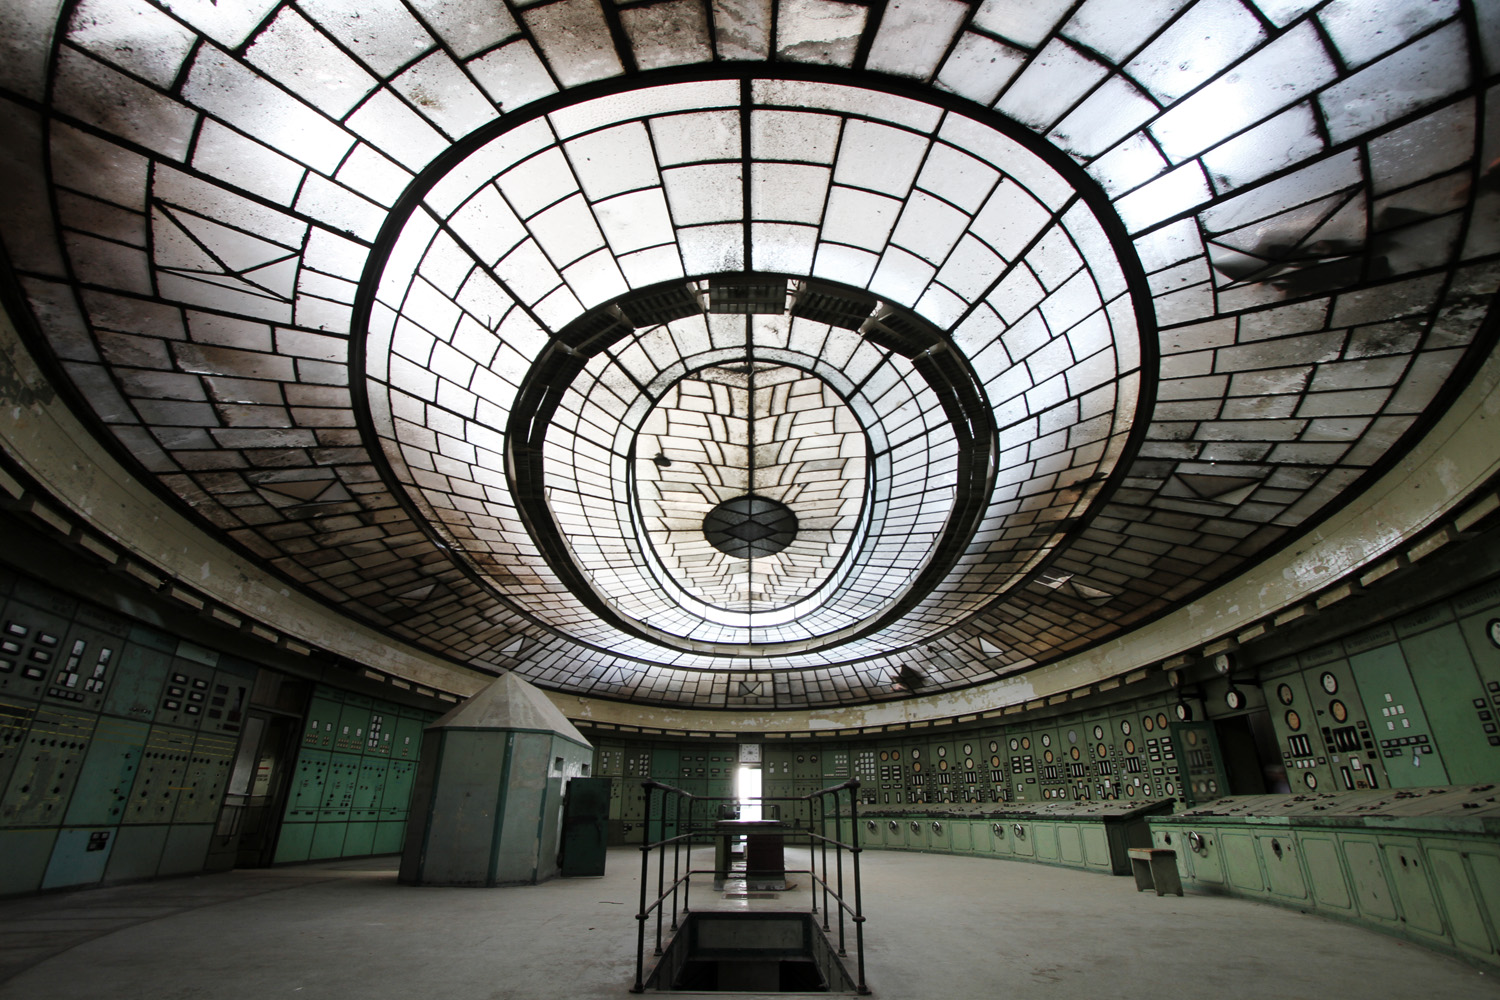 Rare Glimpse Inside Magnificent, Abandoned Shrine To Electricity